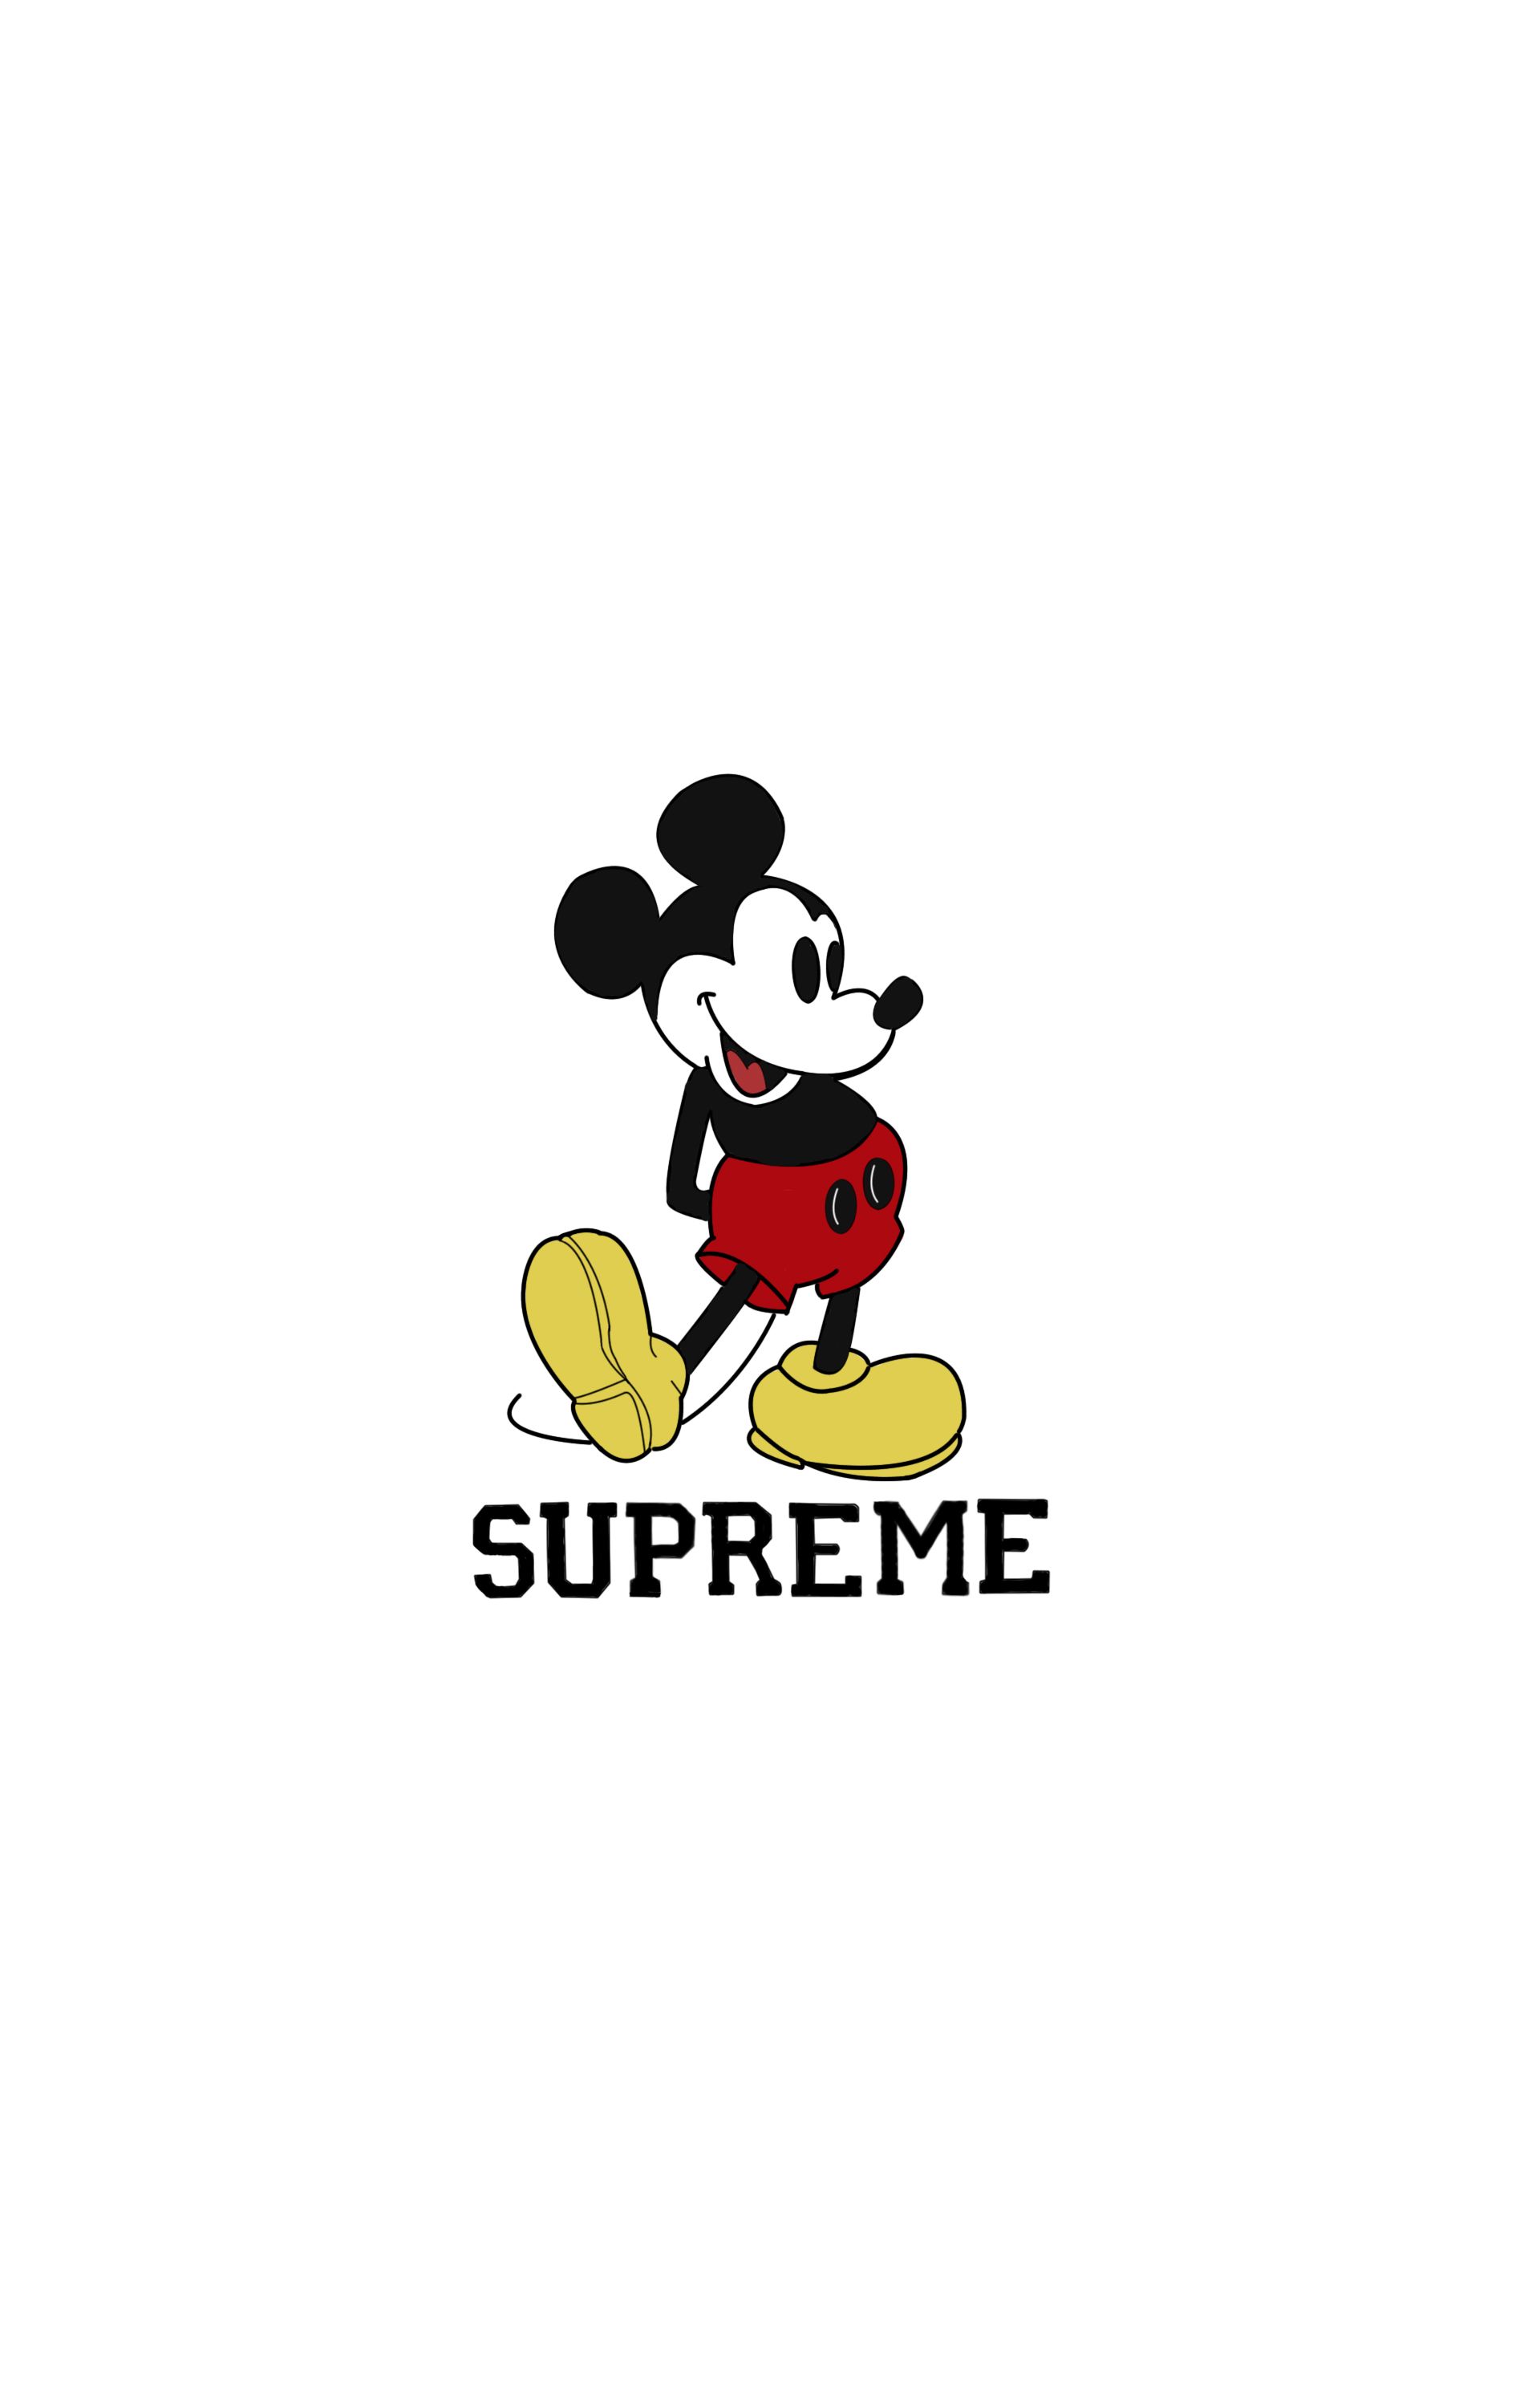 Supreme Iphone Wallpapers Wallpaper Cave - Supreme Wallpaper Iphone 7 , HD Wallpaper & Backgrounds